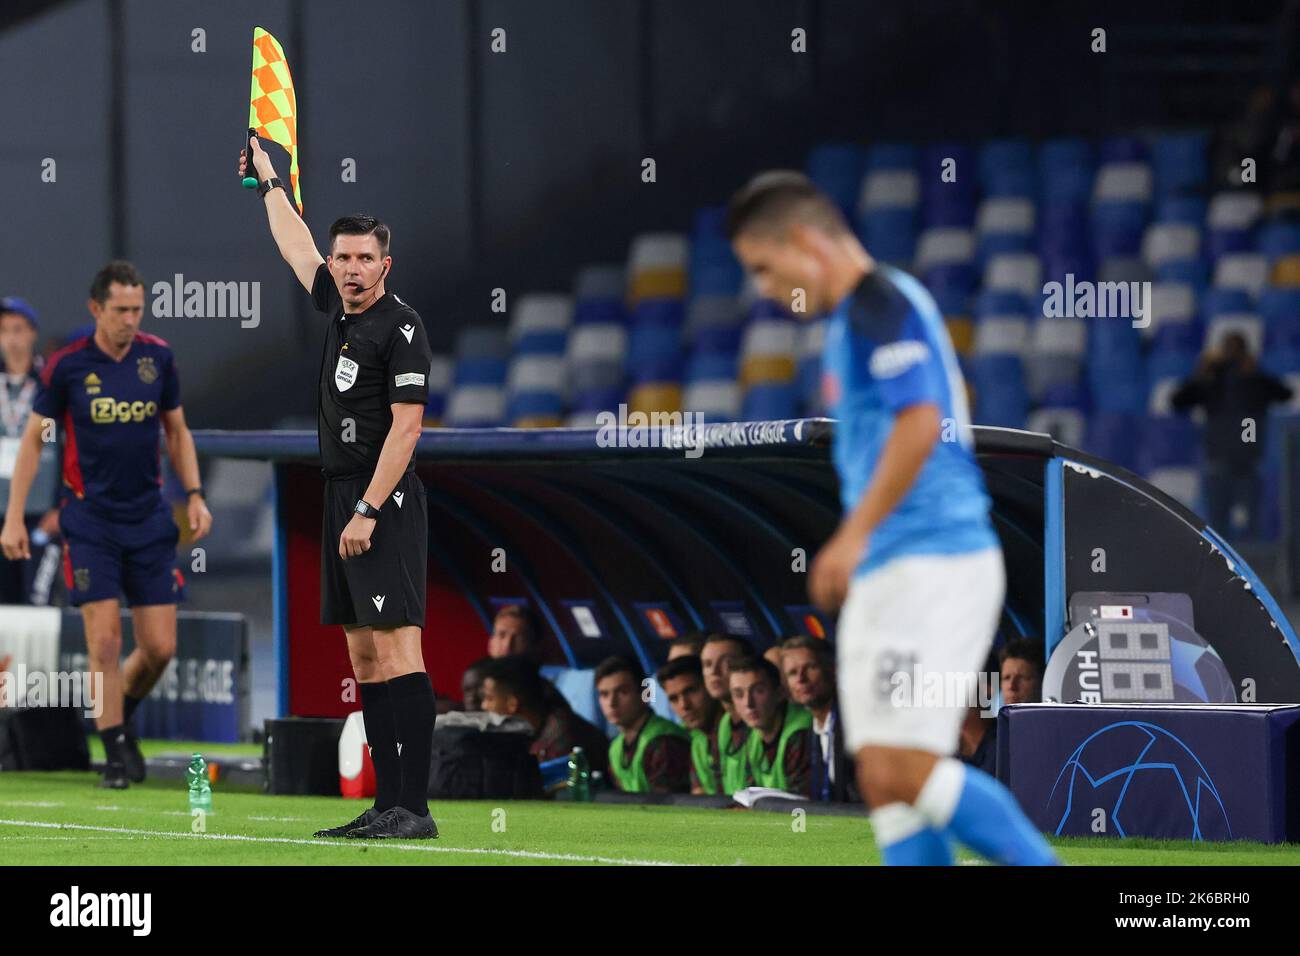 NAPELS, ITALY - OCTOBER 12: assistant referee Stefan Lupp during the Group A - UEFA Champions League match between Napoli and Ajax at the Stadio Diego Armando Maradona on October 12, 2022 in Napels, Italy (Photo by Ben Gal/Orange Pictures) Stock Photo